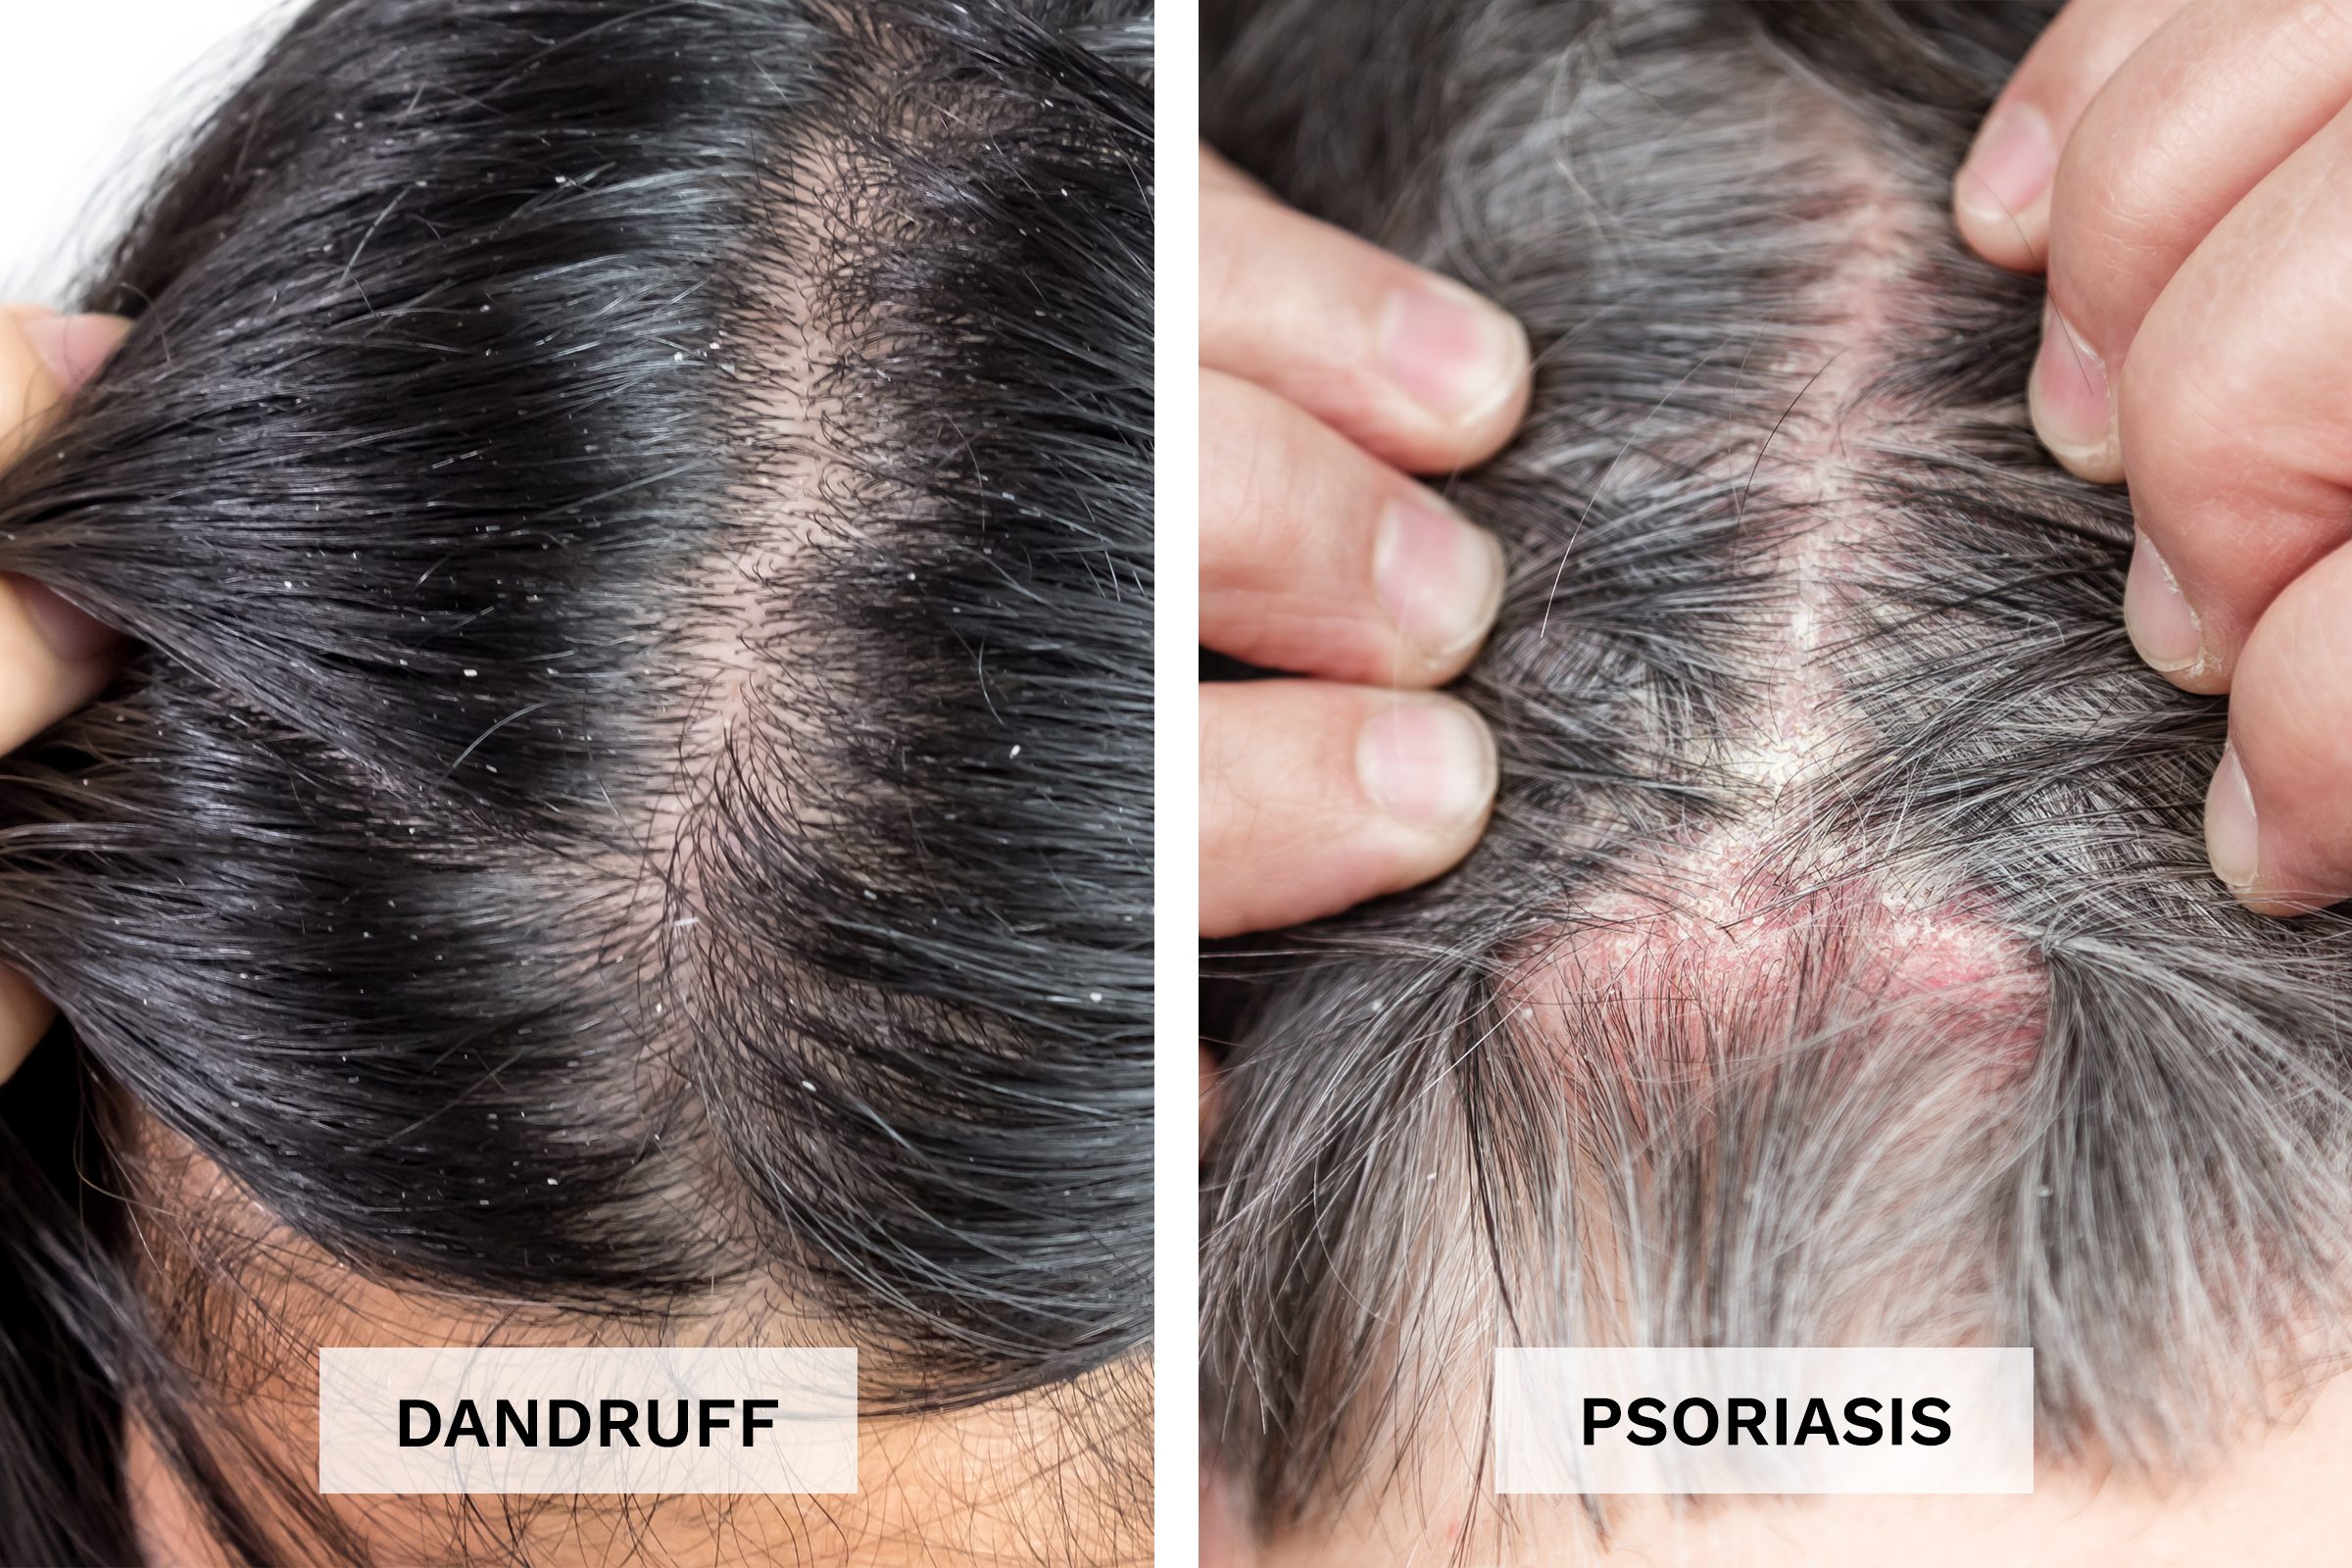 Scalp Psoriasis vs. Dandruff: What’s Causing Your Flakes? | The Healthy